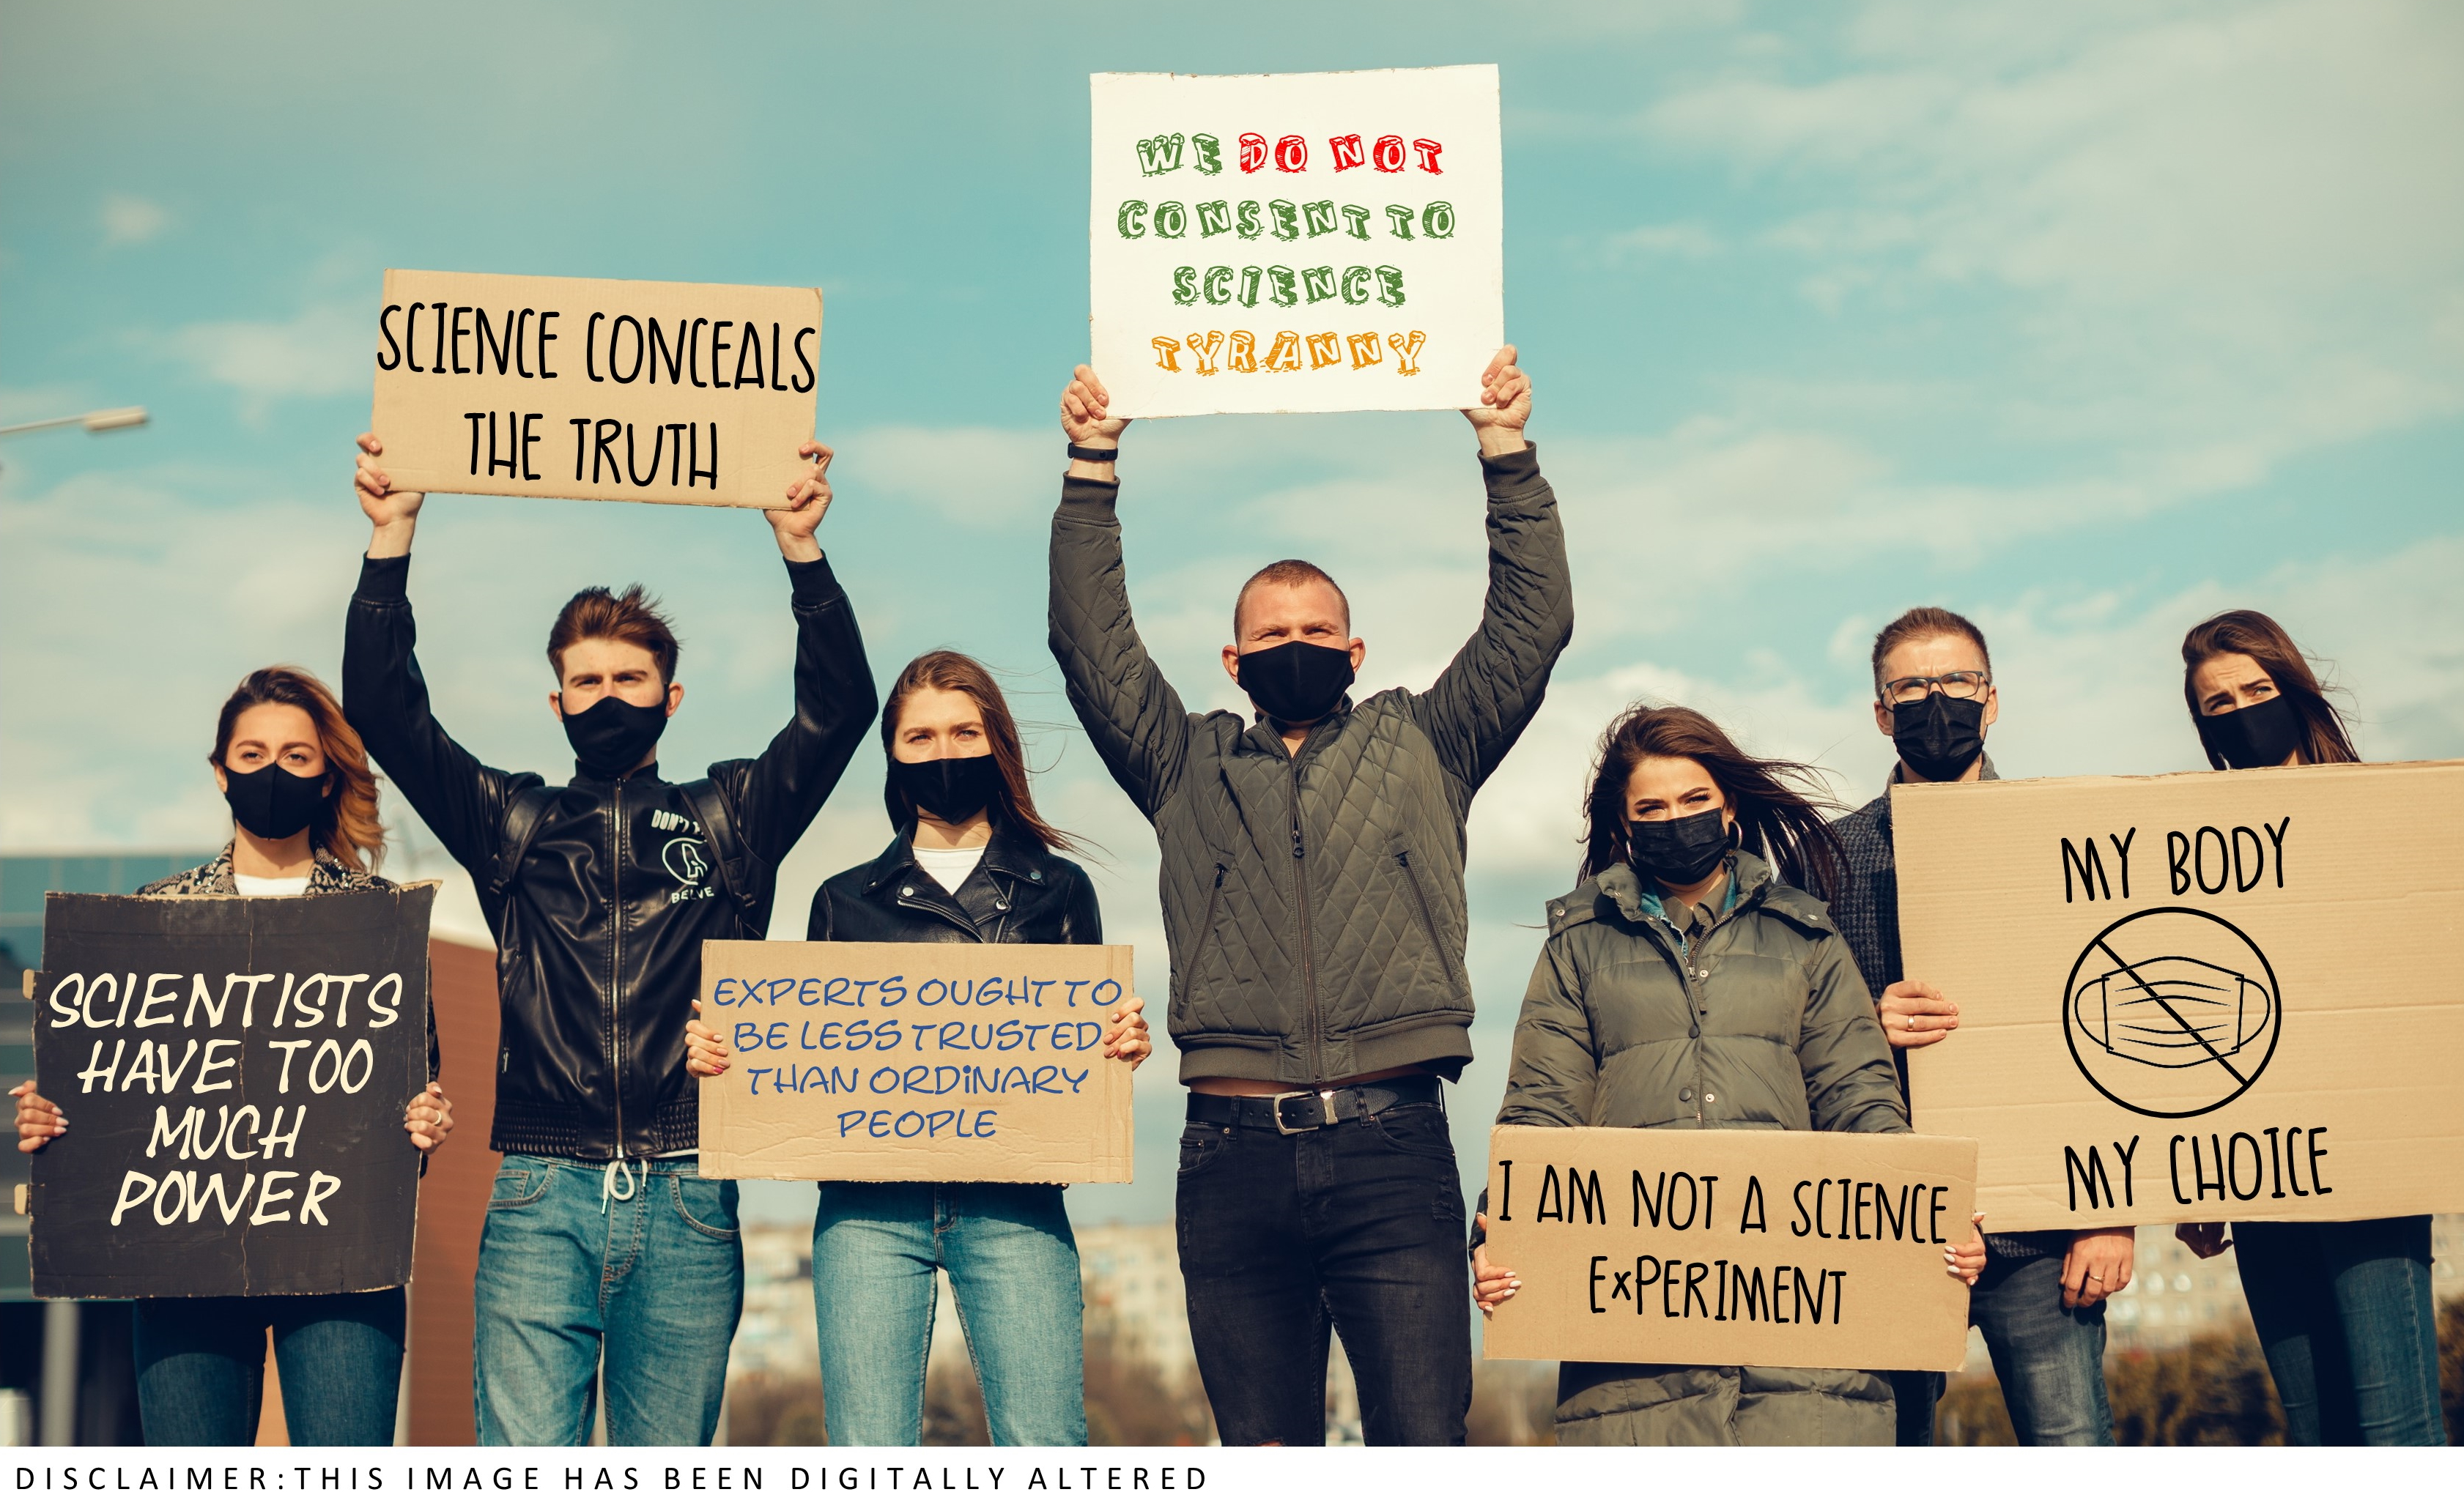 The people have had enough of experts!” How to understand populist challenges to science